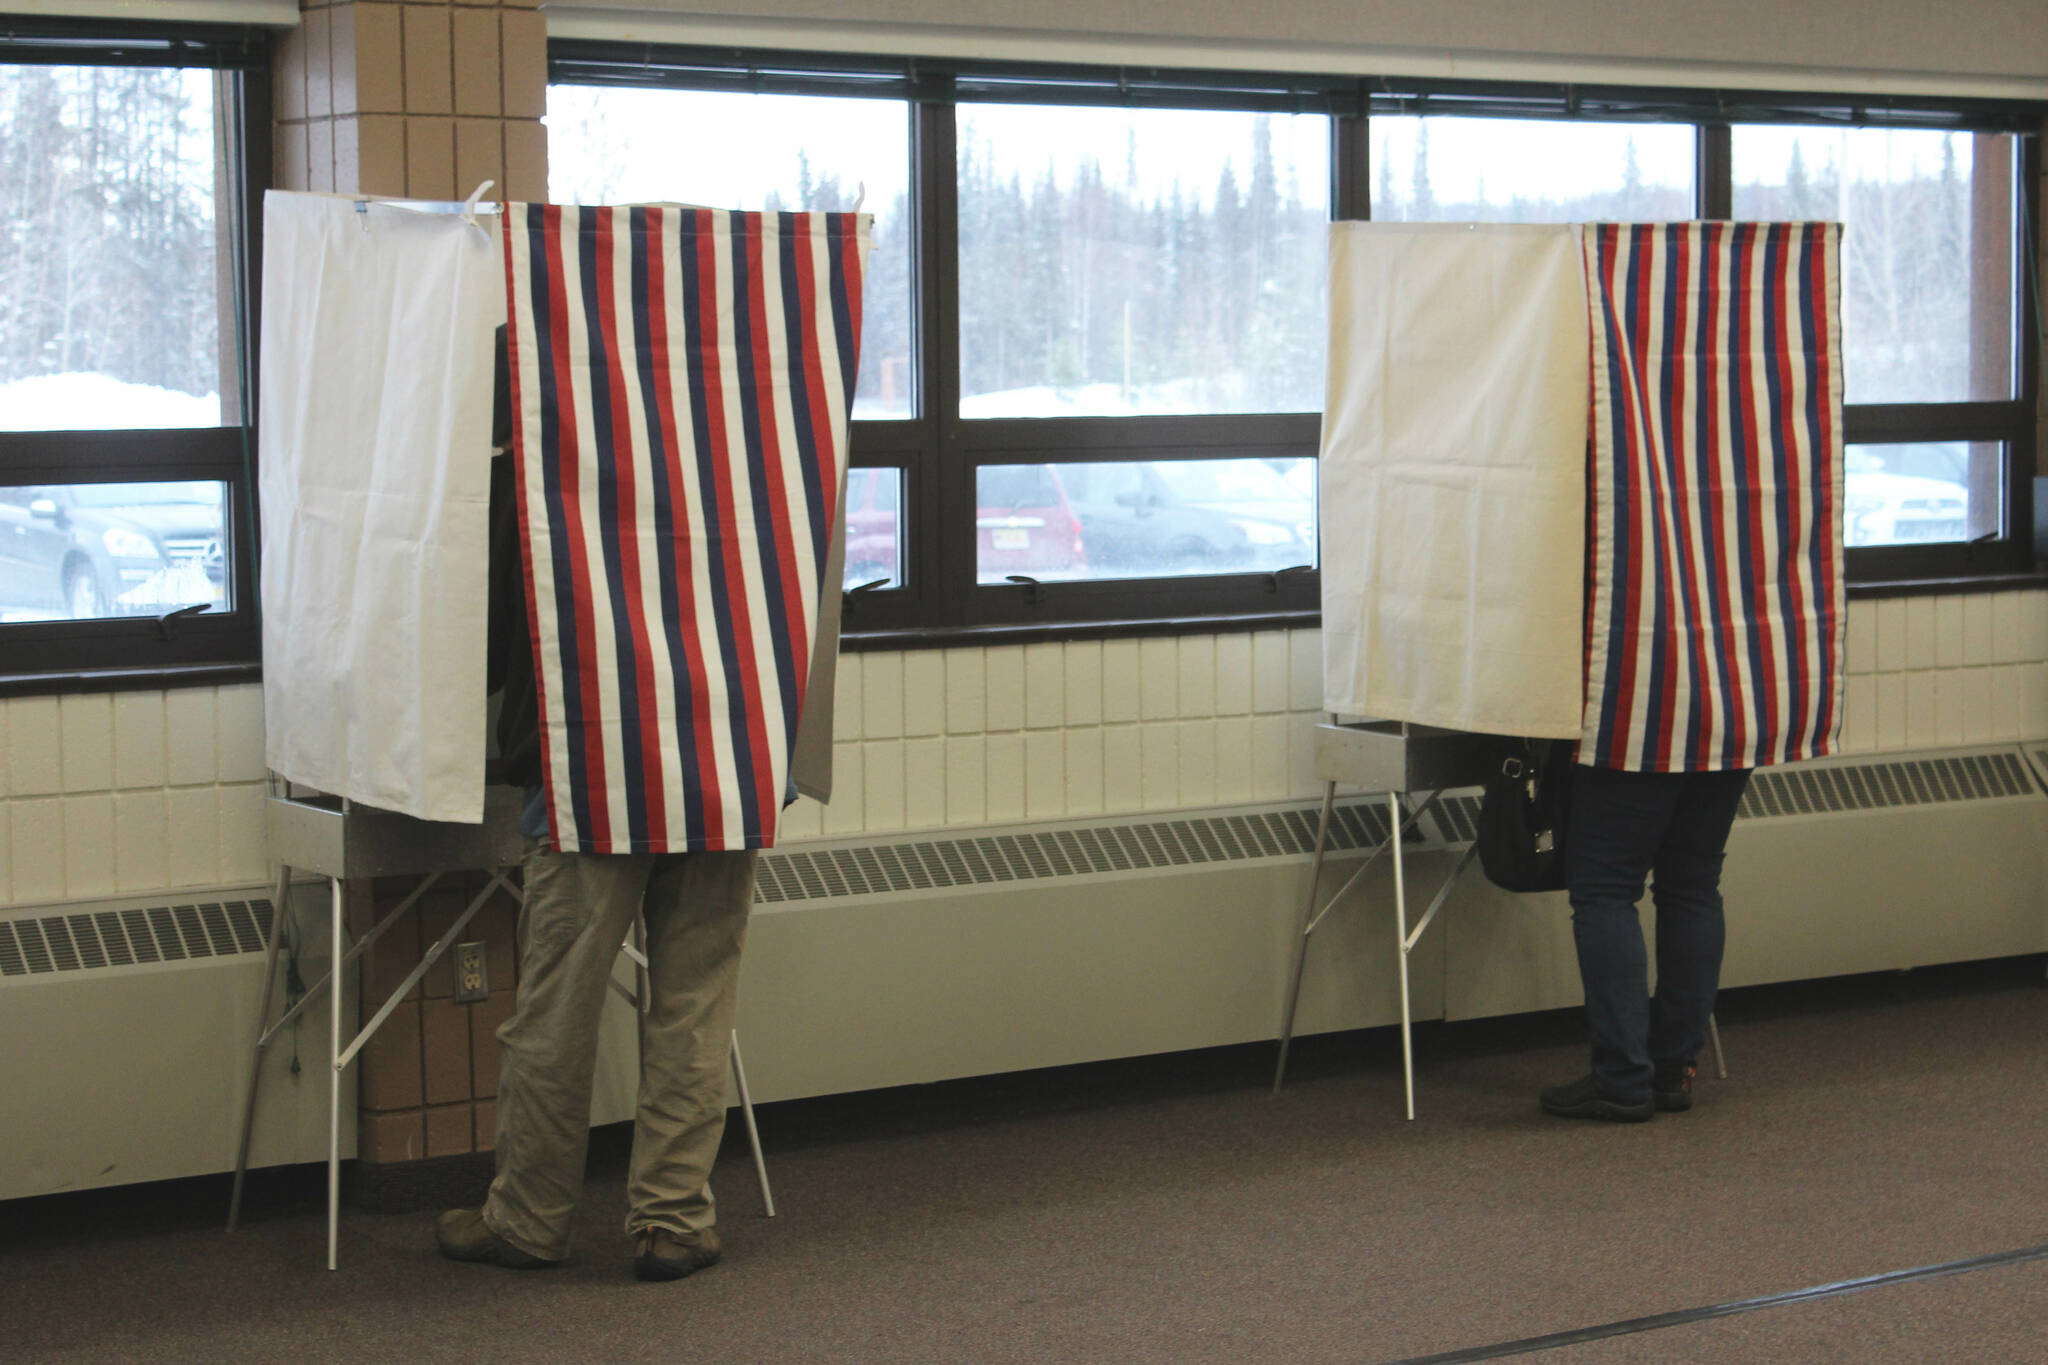 People vote in polling booths at the Soldotna Regional Sports Complex on Tuesday, Nov. 8, 2022, in Soldotna, Alaska. (Ashlyn O’Hara/Peninsula Clarion)